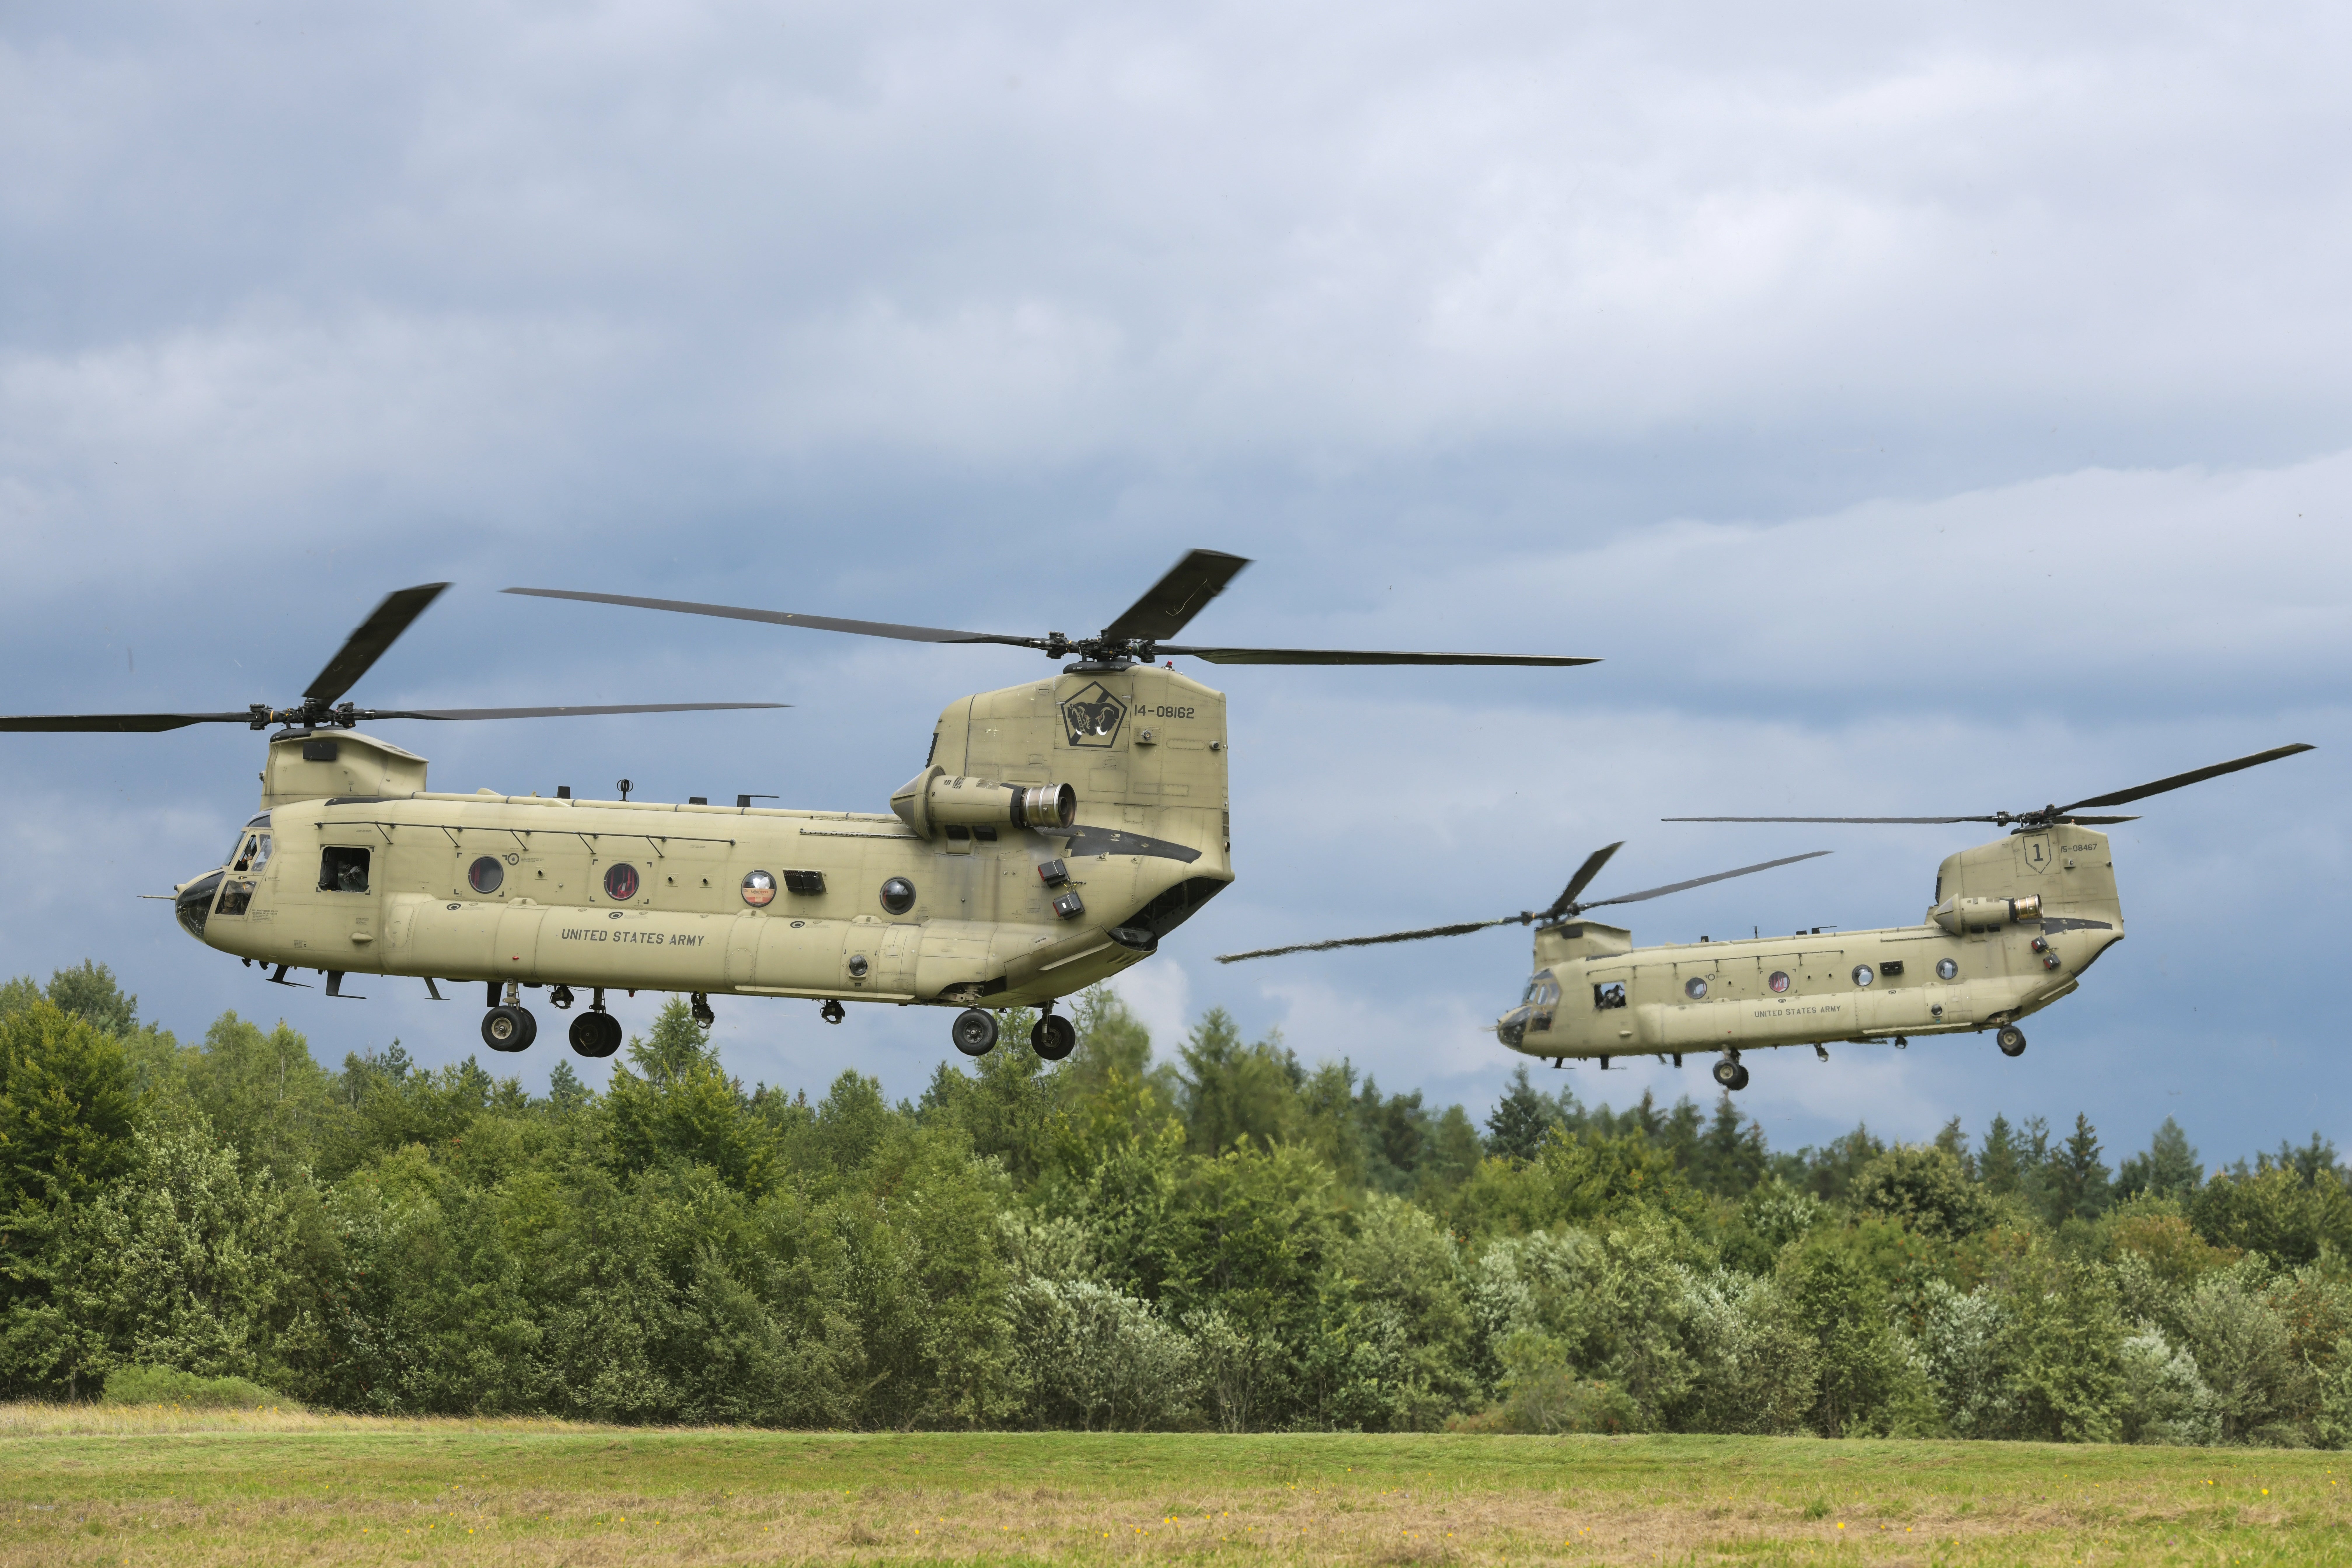 U.S. Soldiers, assigned to 1st Combat Aviation Brigade, 1st Infantry Division, lift off in CH-47 Chinook helicopters prior to aerial gunnery training at the 7th Army Training Command's Grafenwoehr Training Area, Germany, Aug. 4, 2021. 

(U.S. Army photo by Markus Rauchenberger)